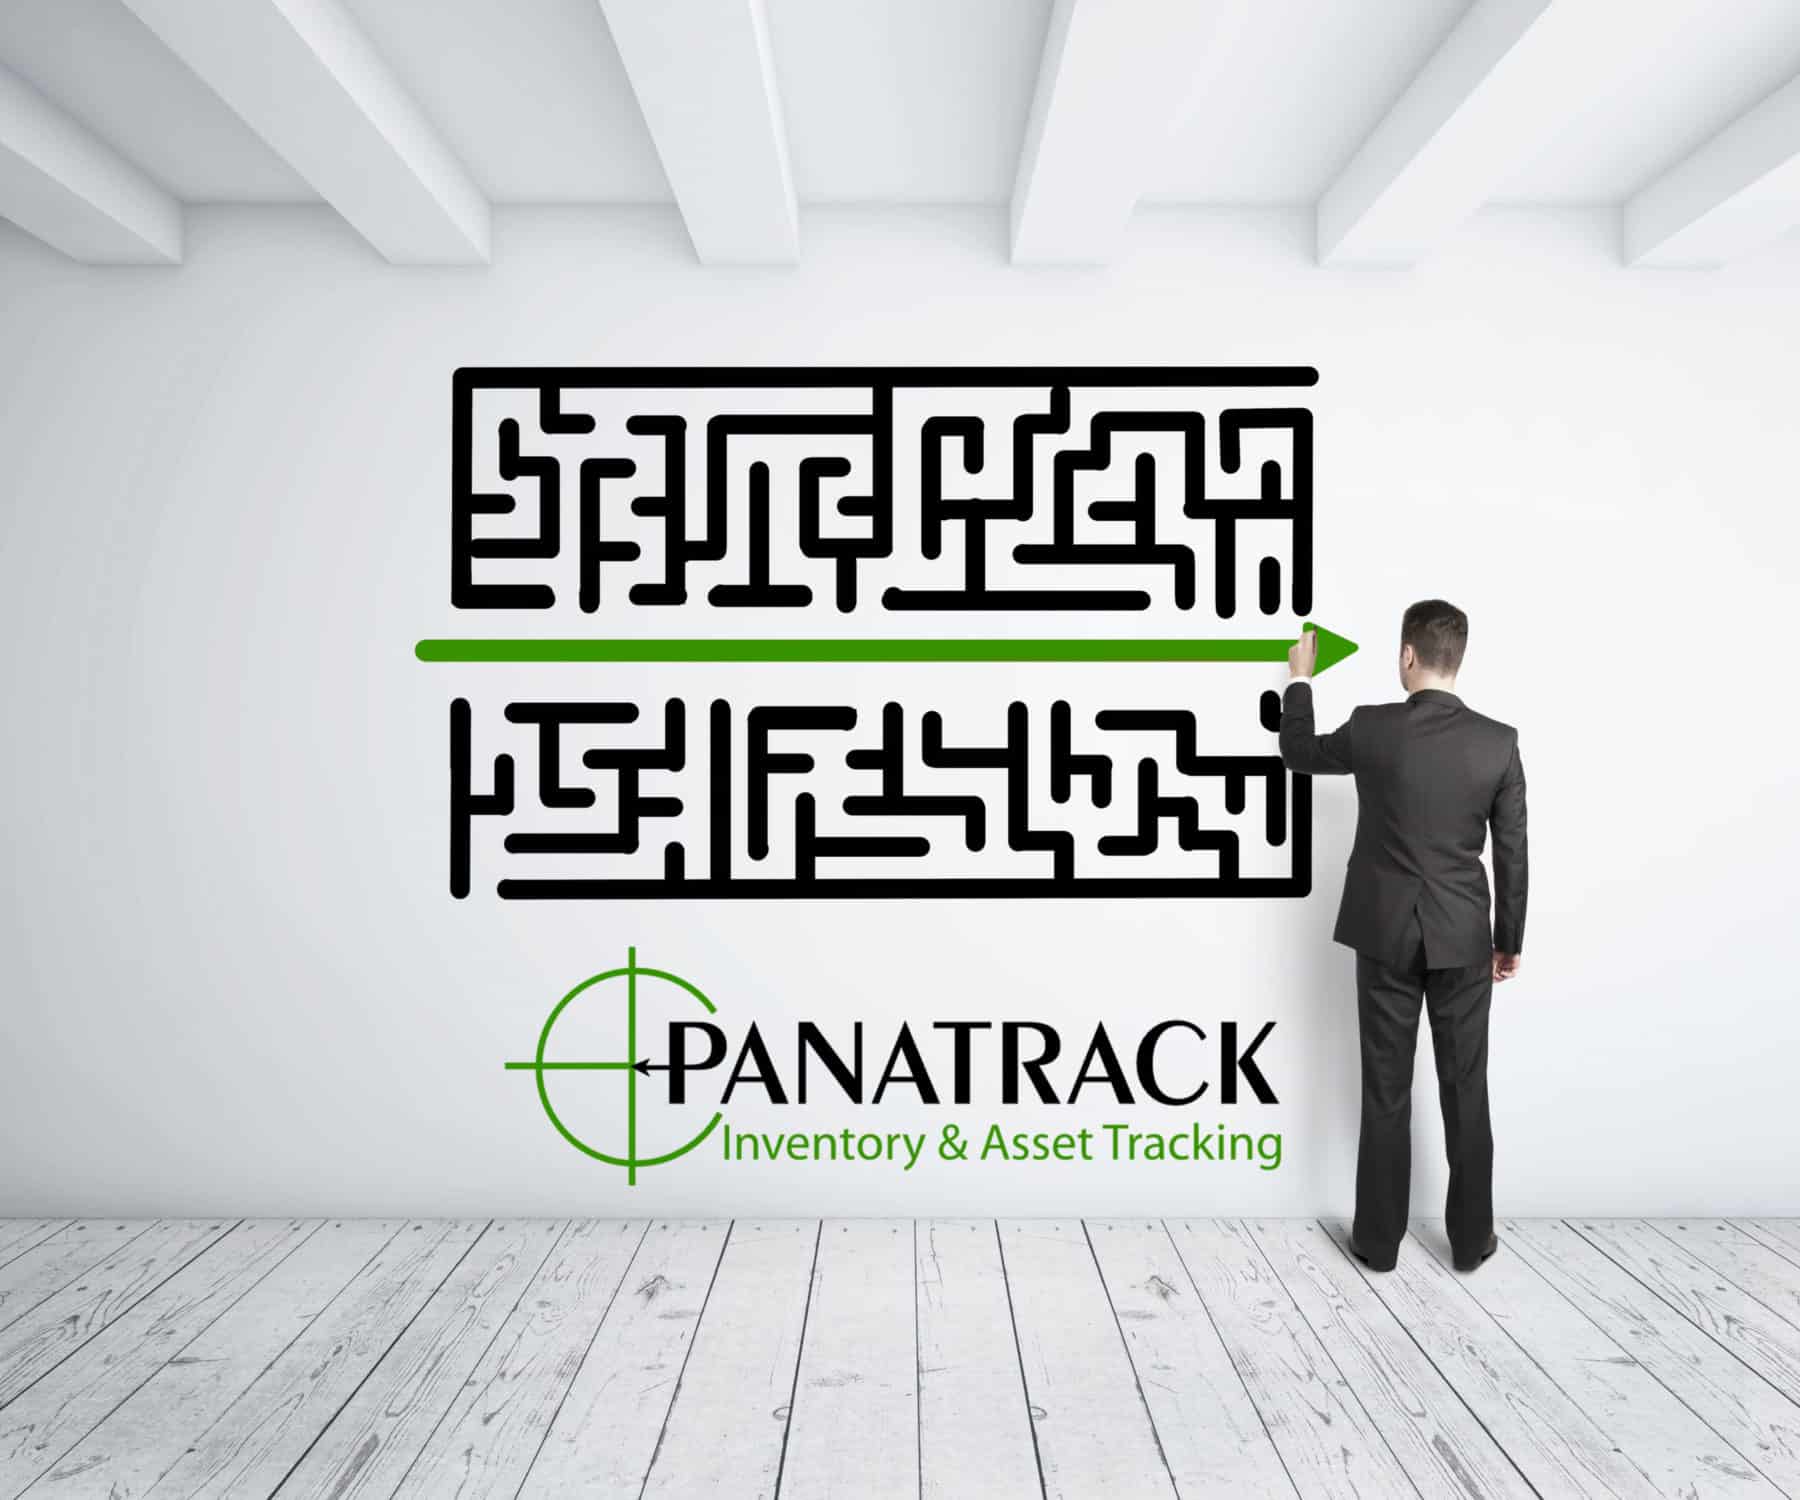 Shorten Your EOY Stock Counts With Panatrack